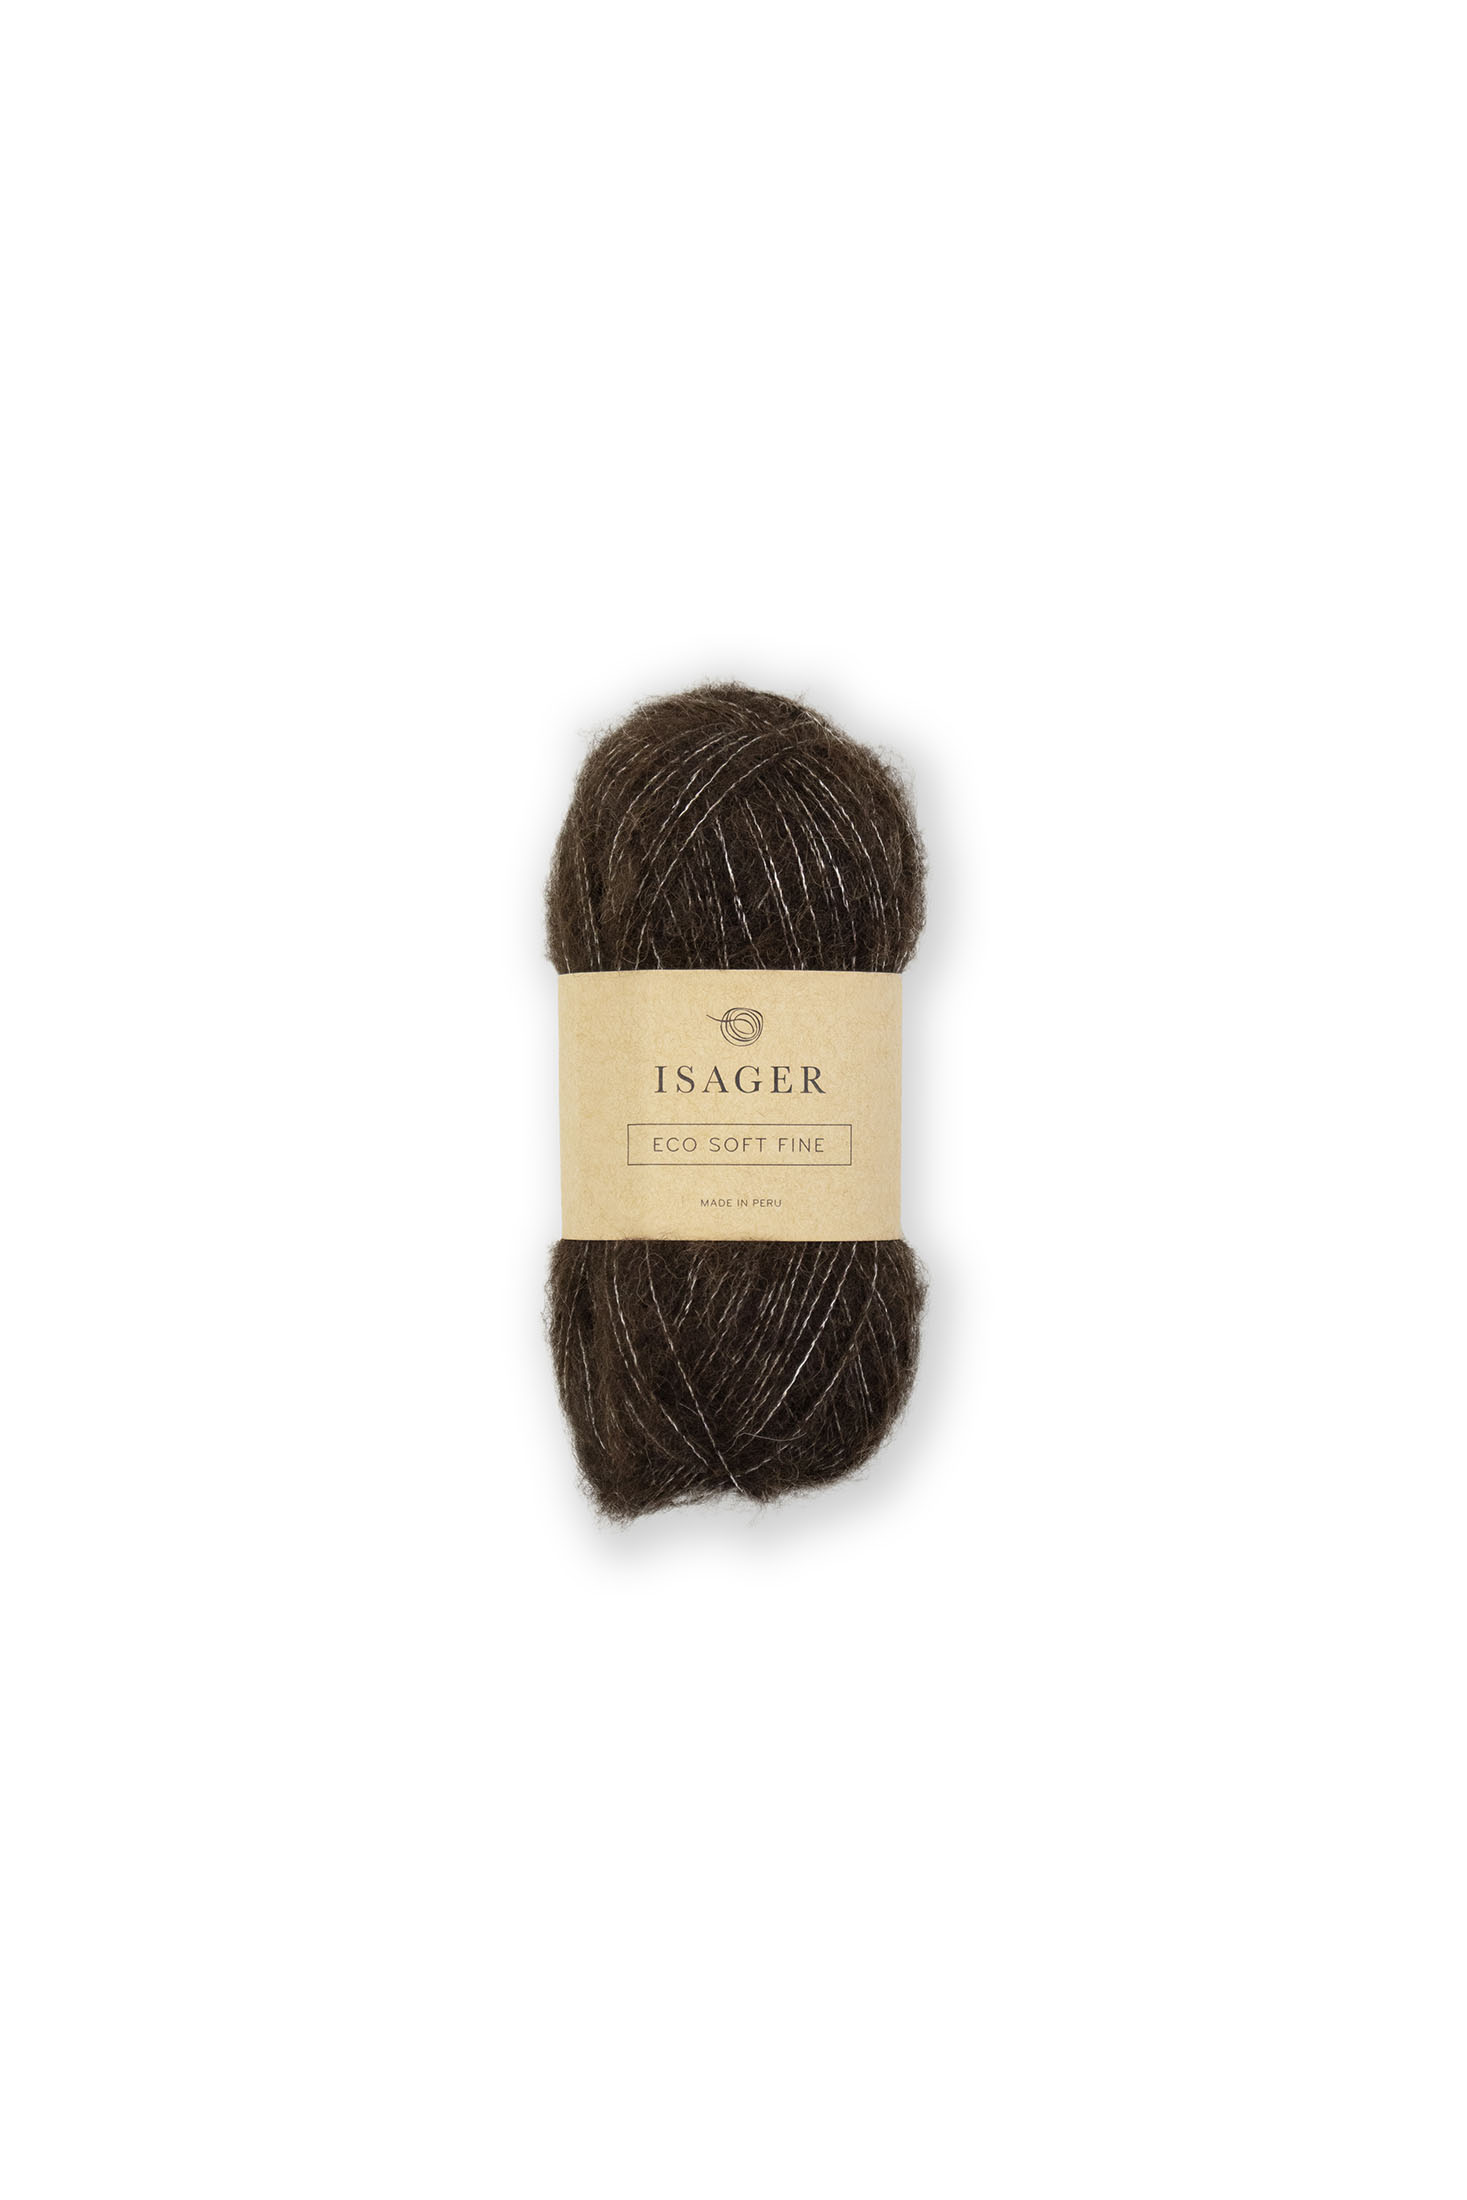 Isager Eco Soft Fine - E8s